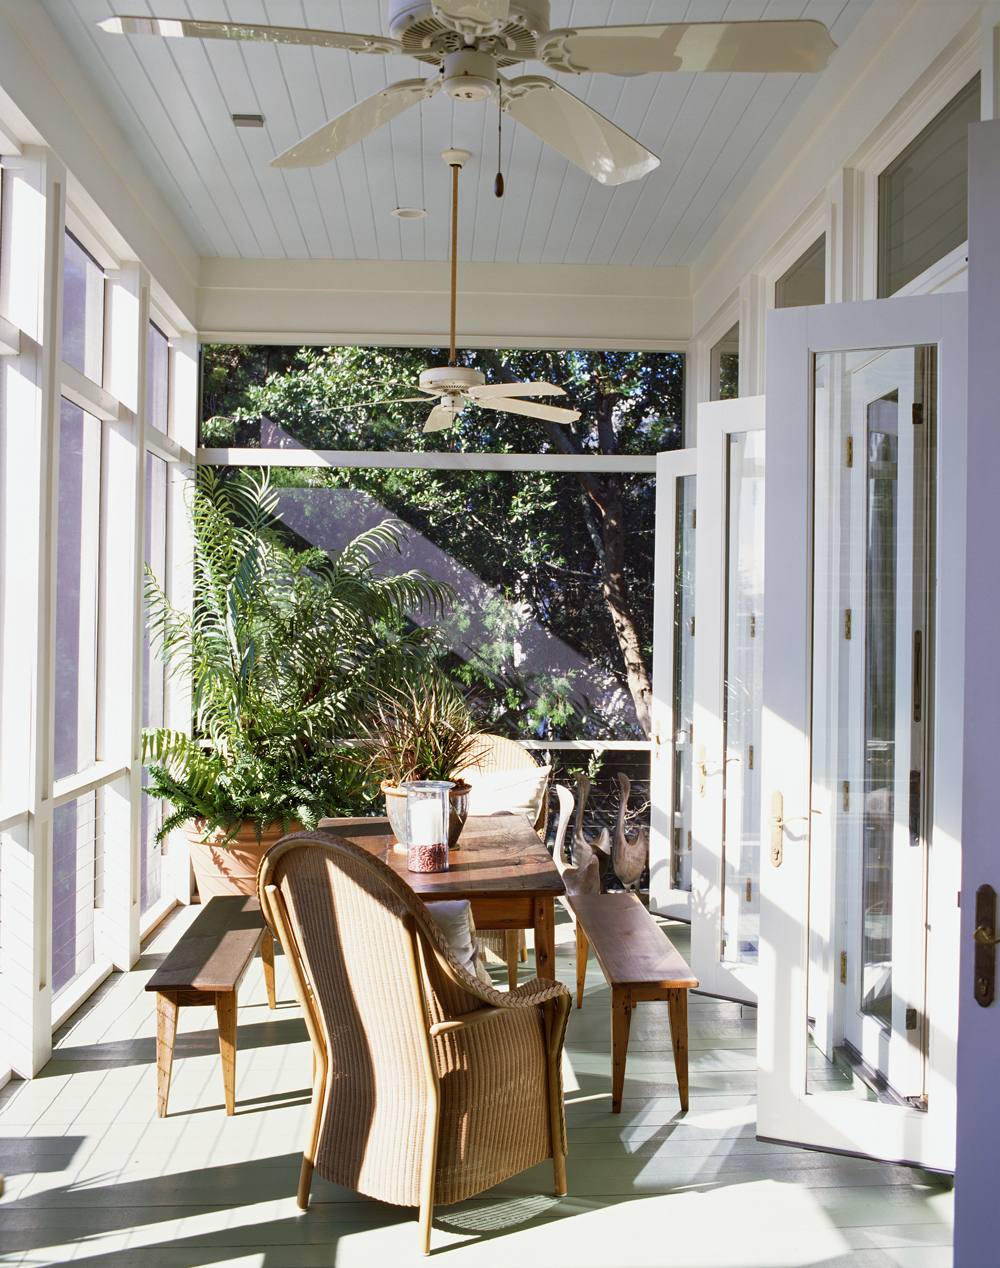 A narrow, bright sunroom with wooden picnic table for dining